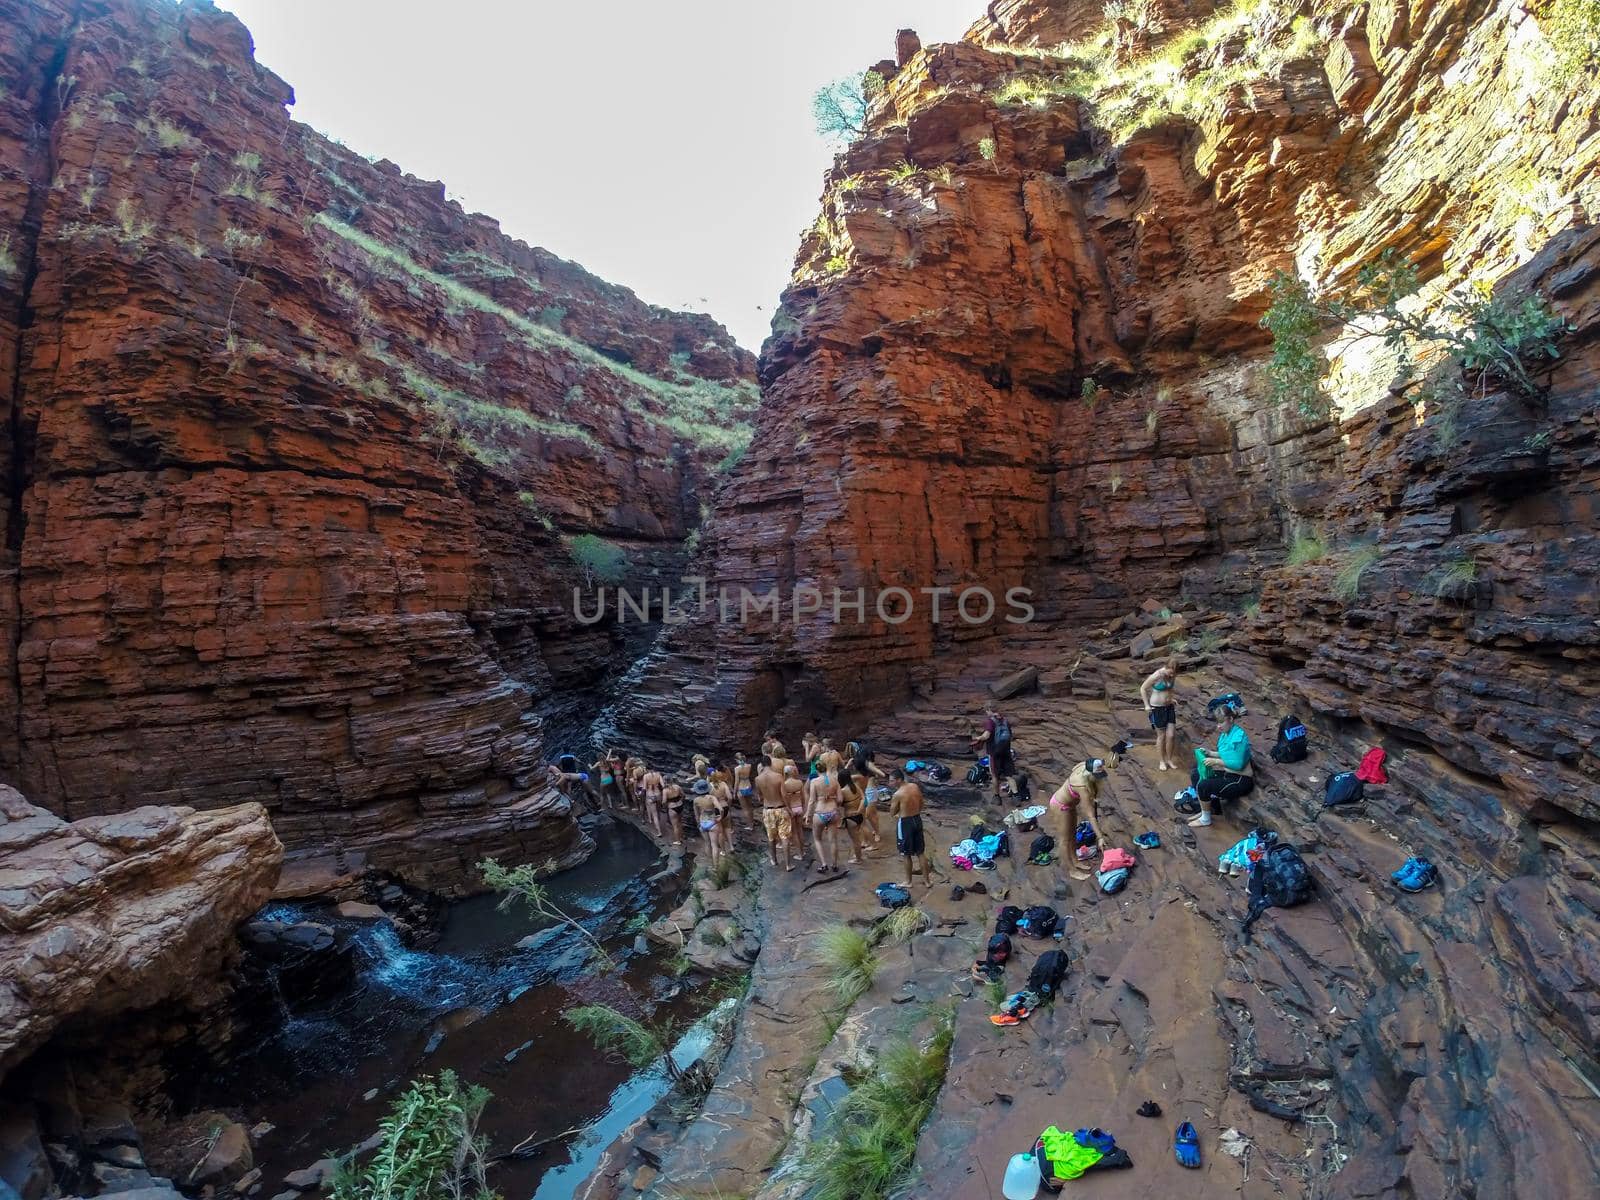 a group of tourist exploring the Handrail Pool, Weano Gorge, Karijini National Park, Western Australia by bettercallcurry